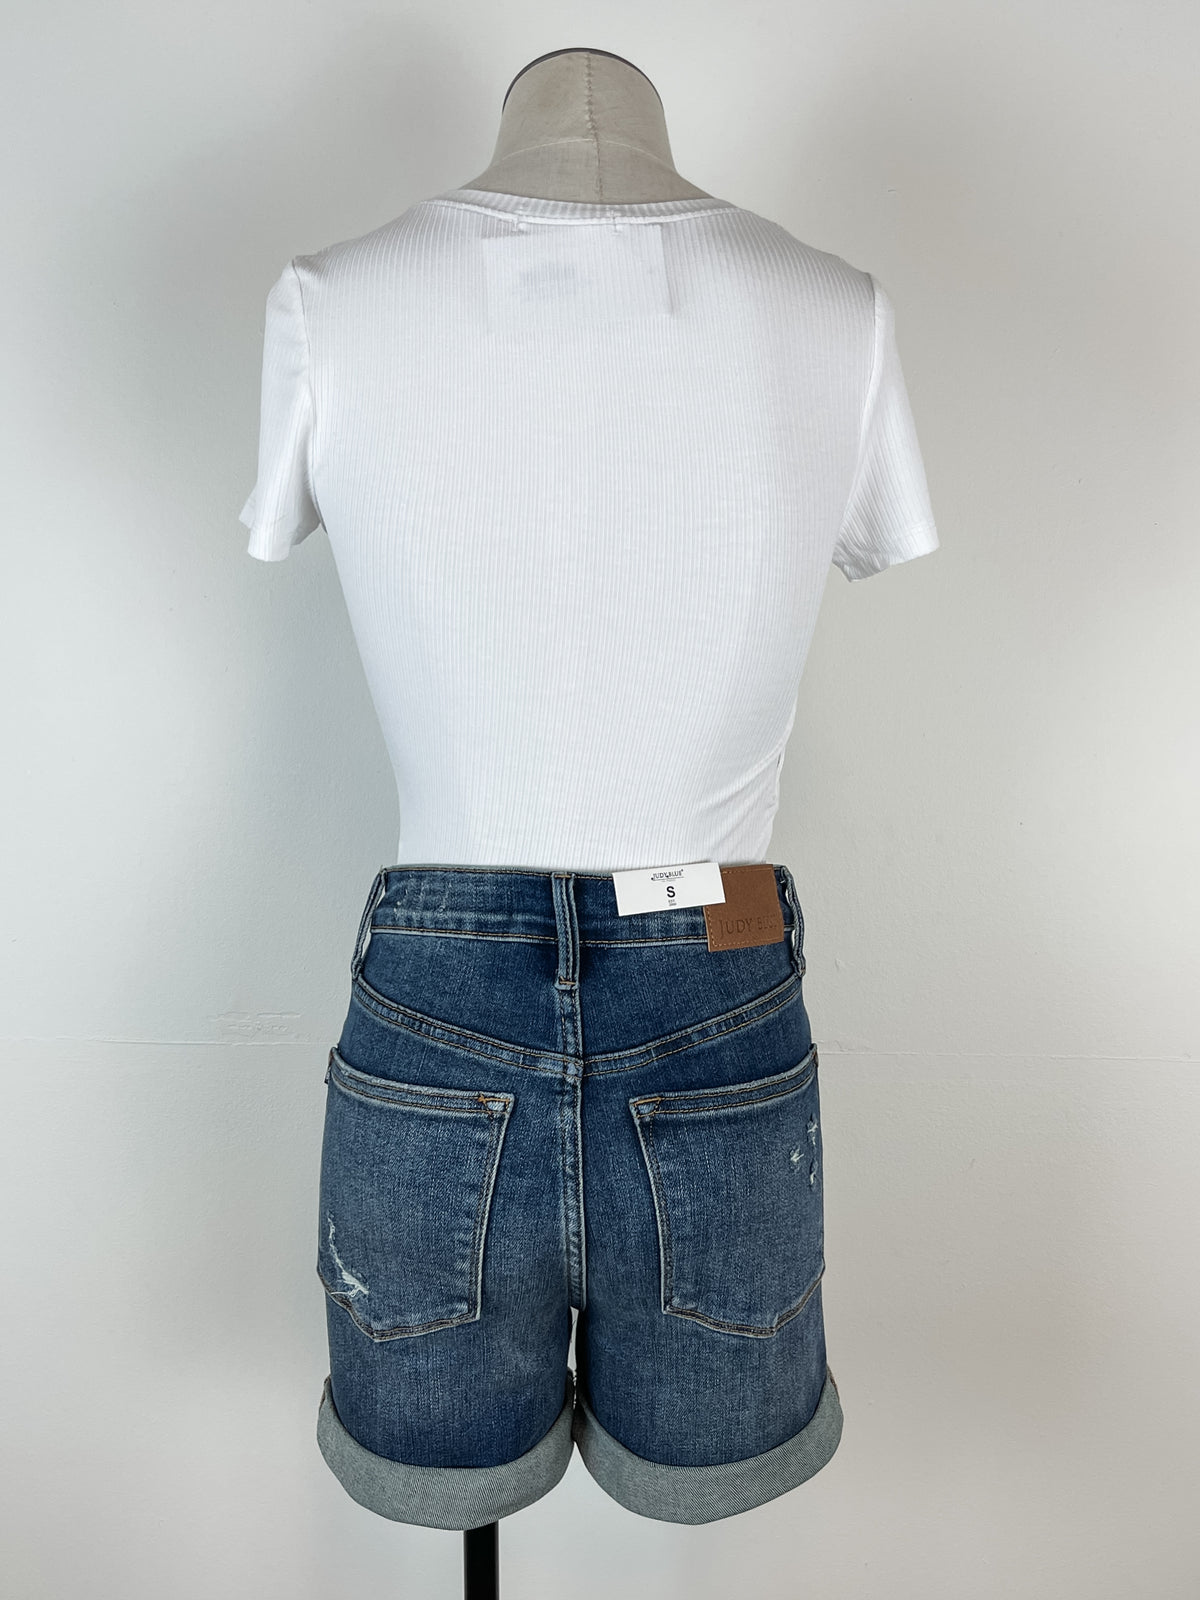 Judy Blue Jeans Double Button Tummy Control Top Bermuda Shorts